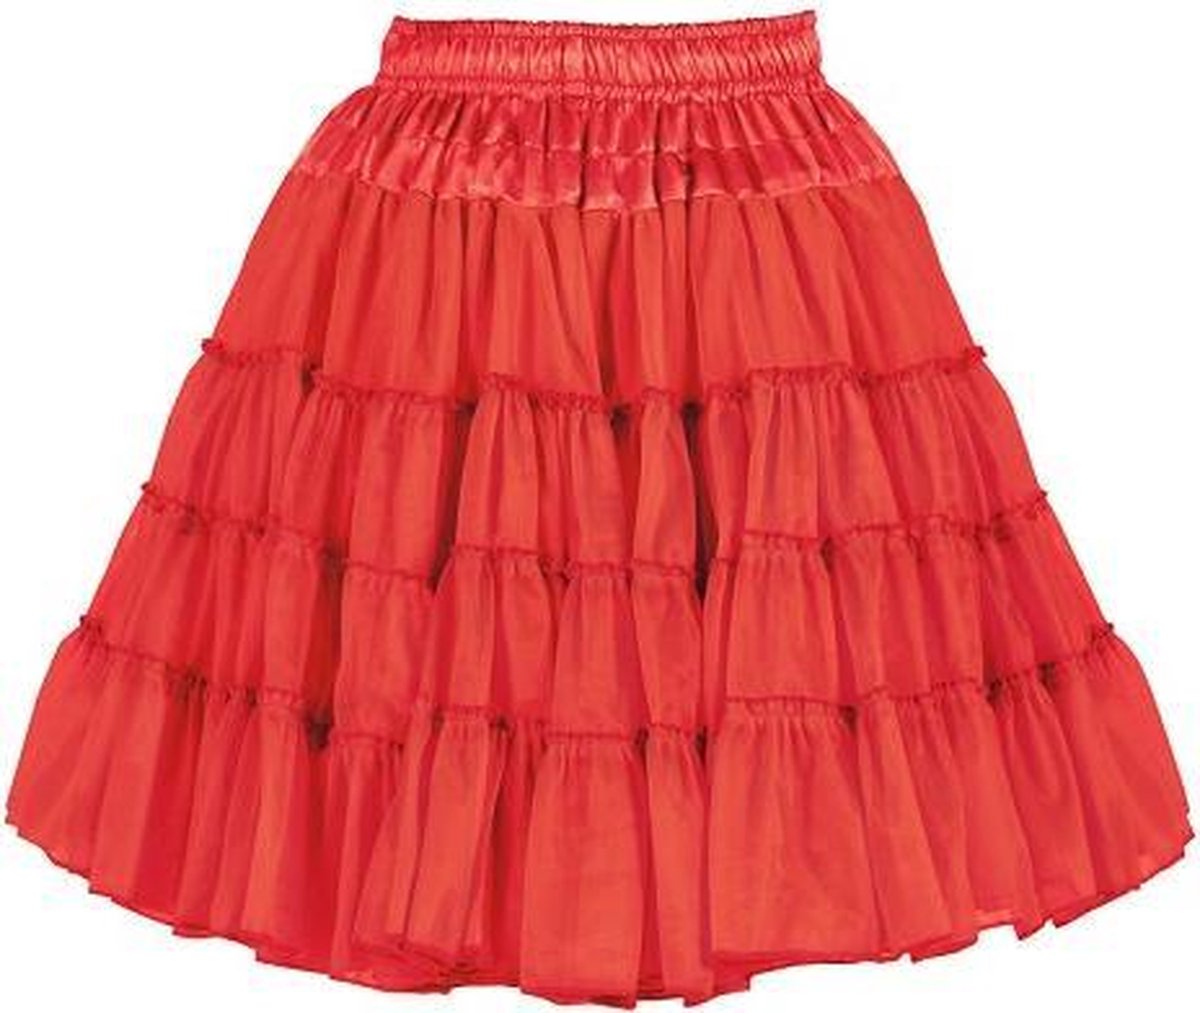 Luxe petticoat 2 laags rood